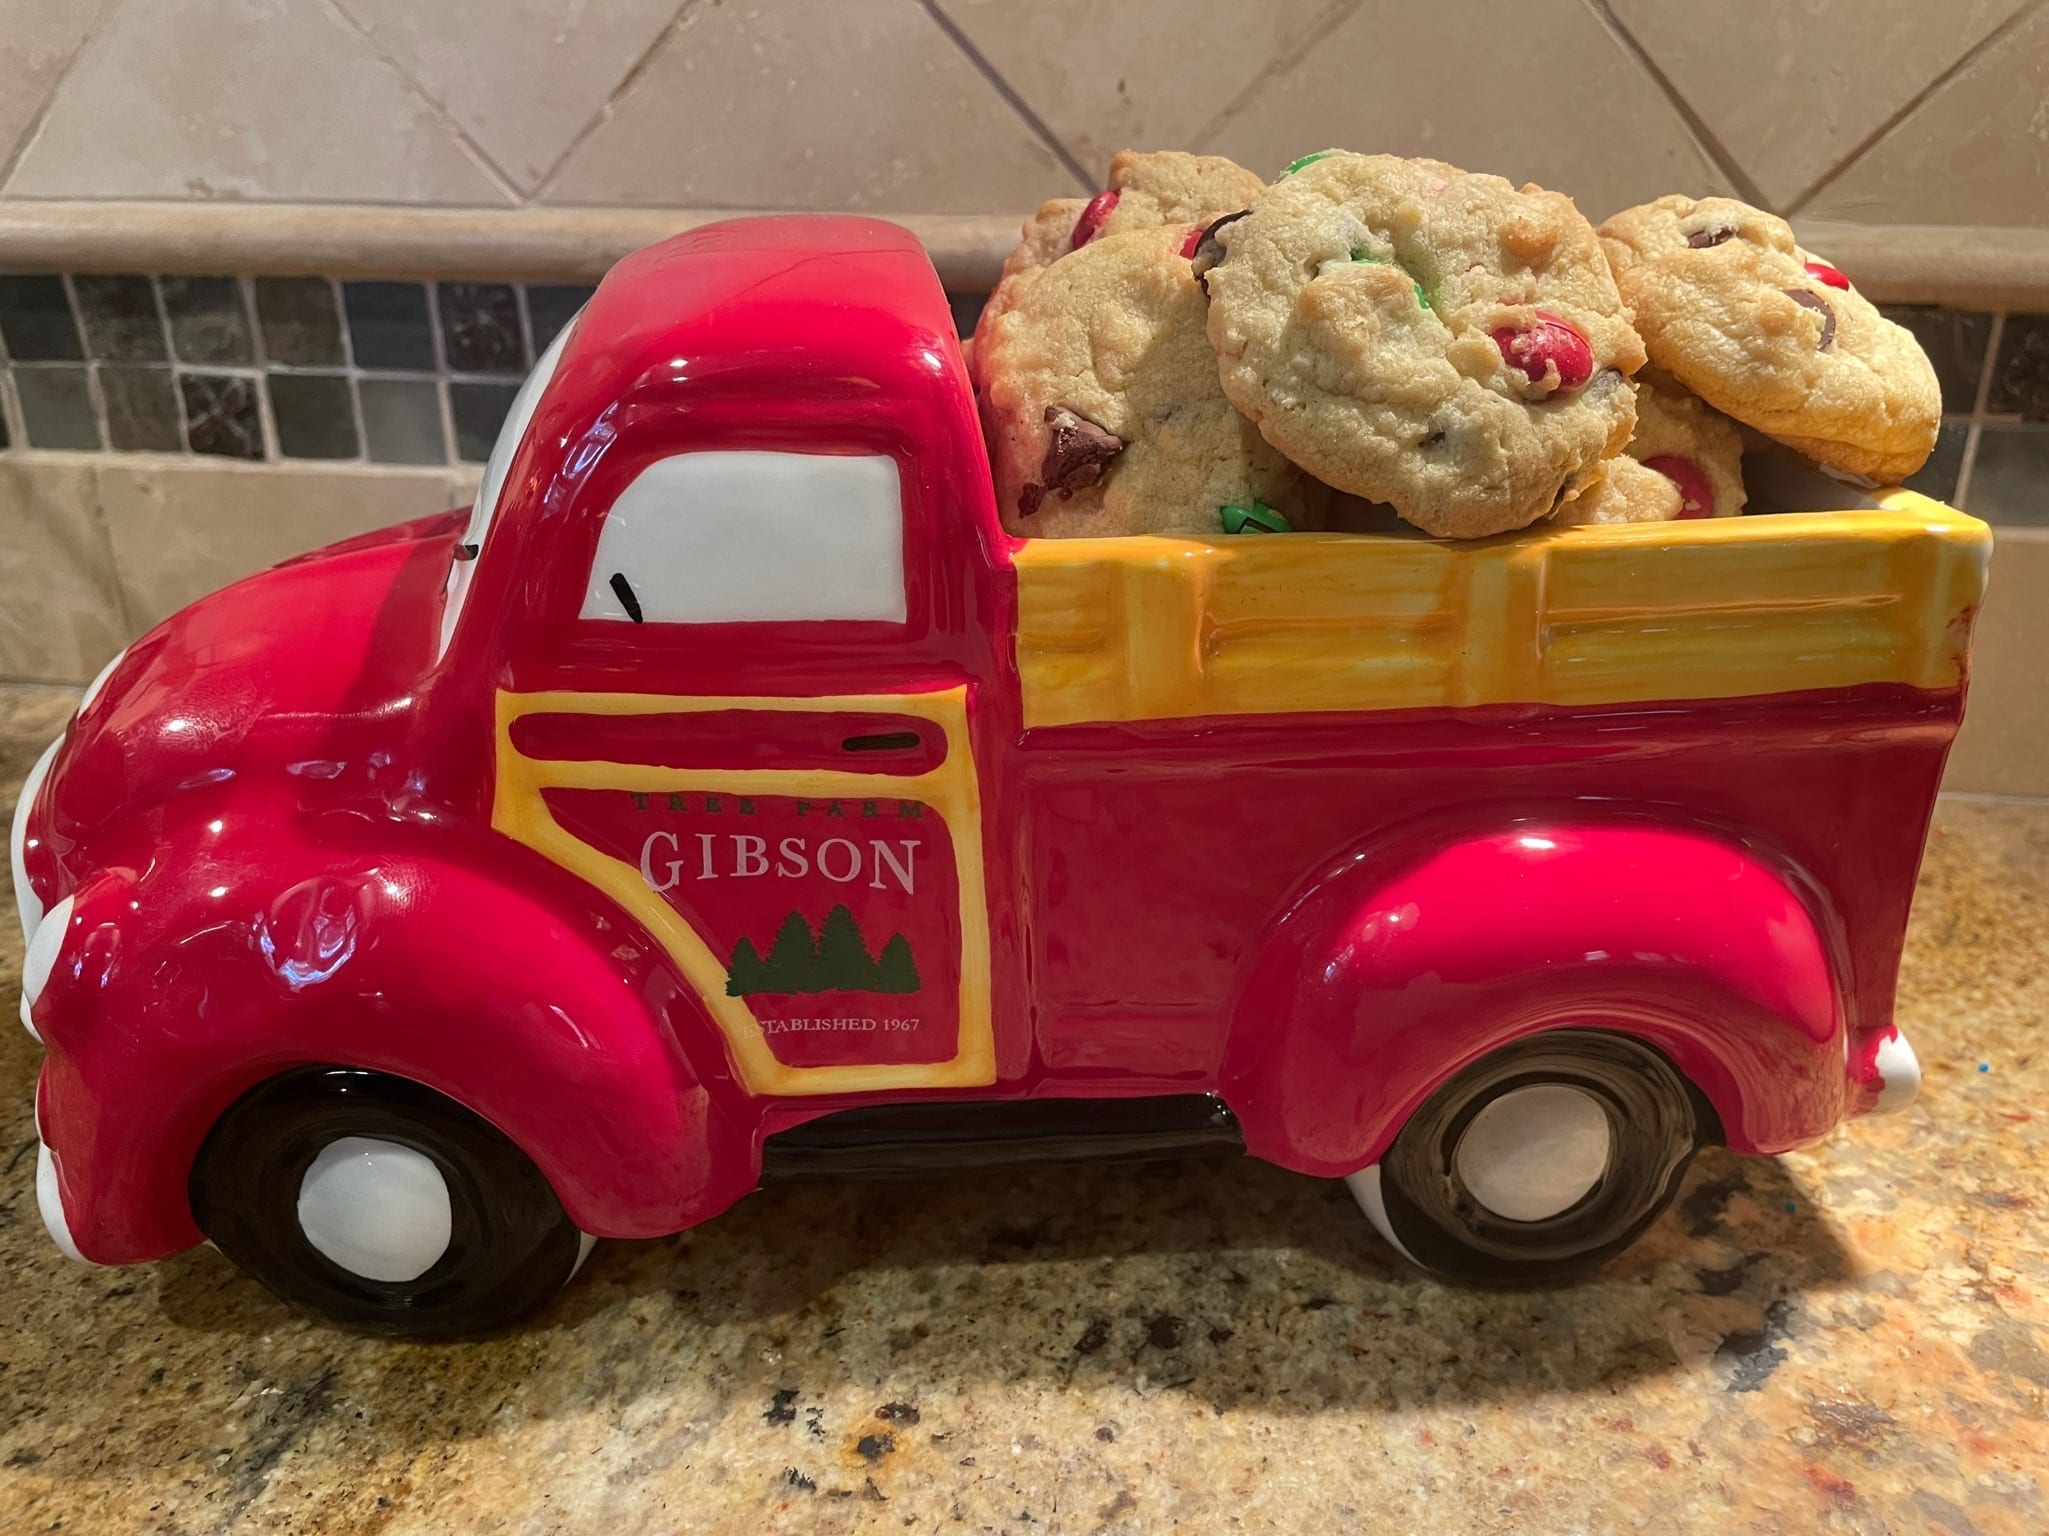 A playful red ceramic truck full of monster cookies